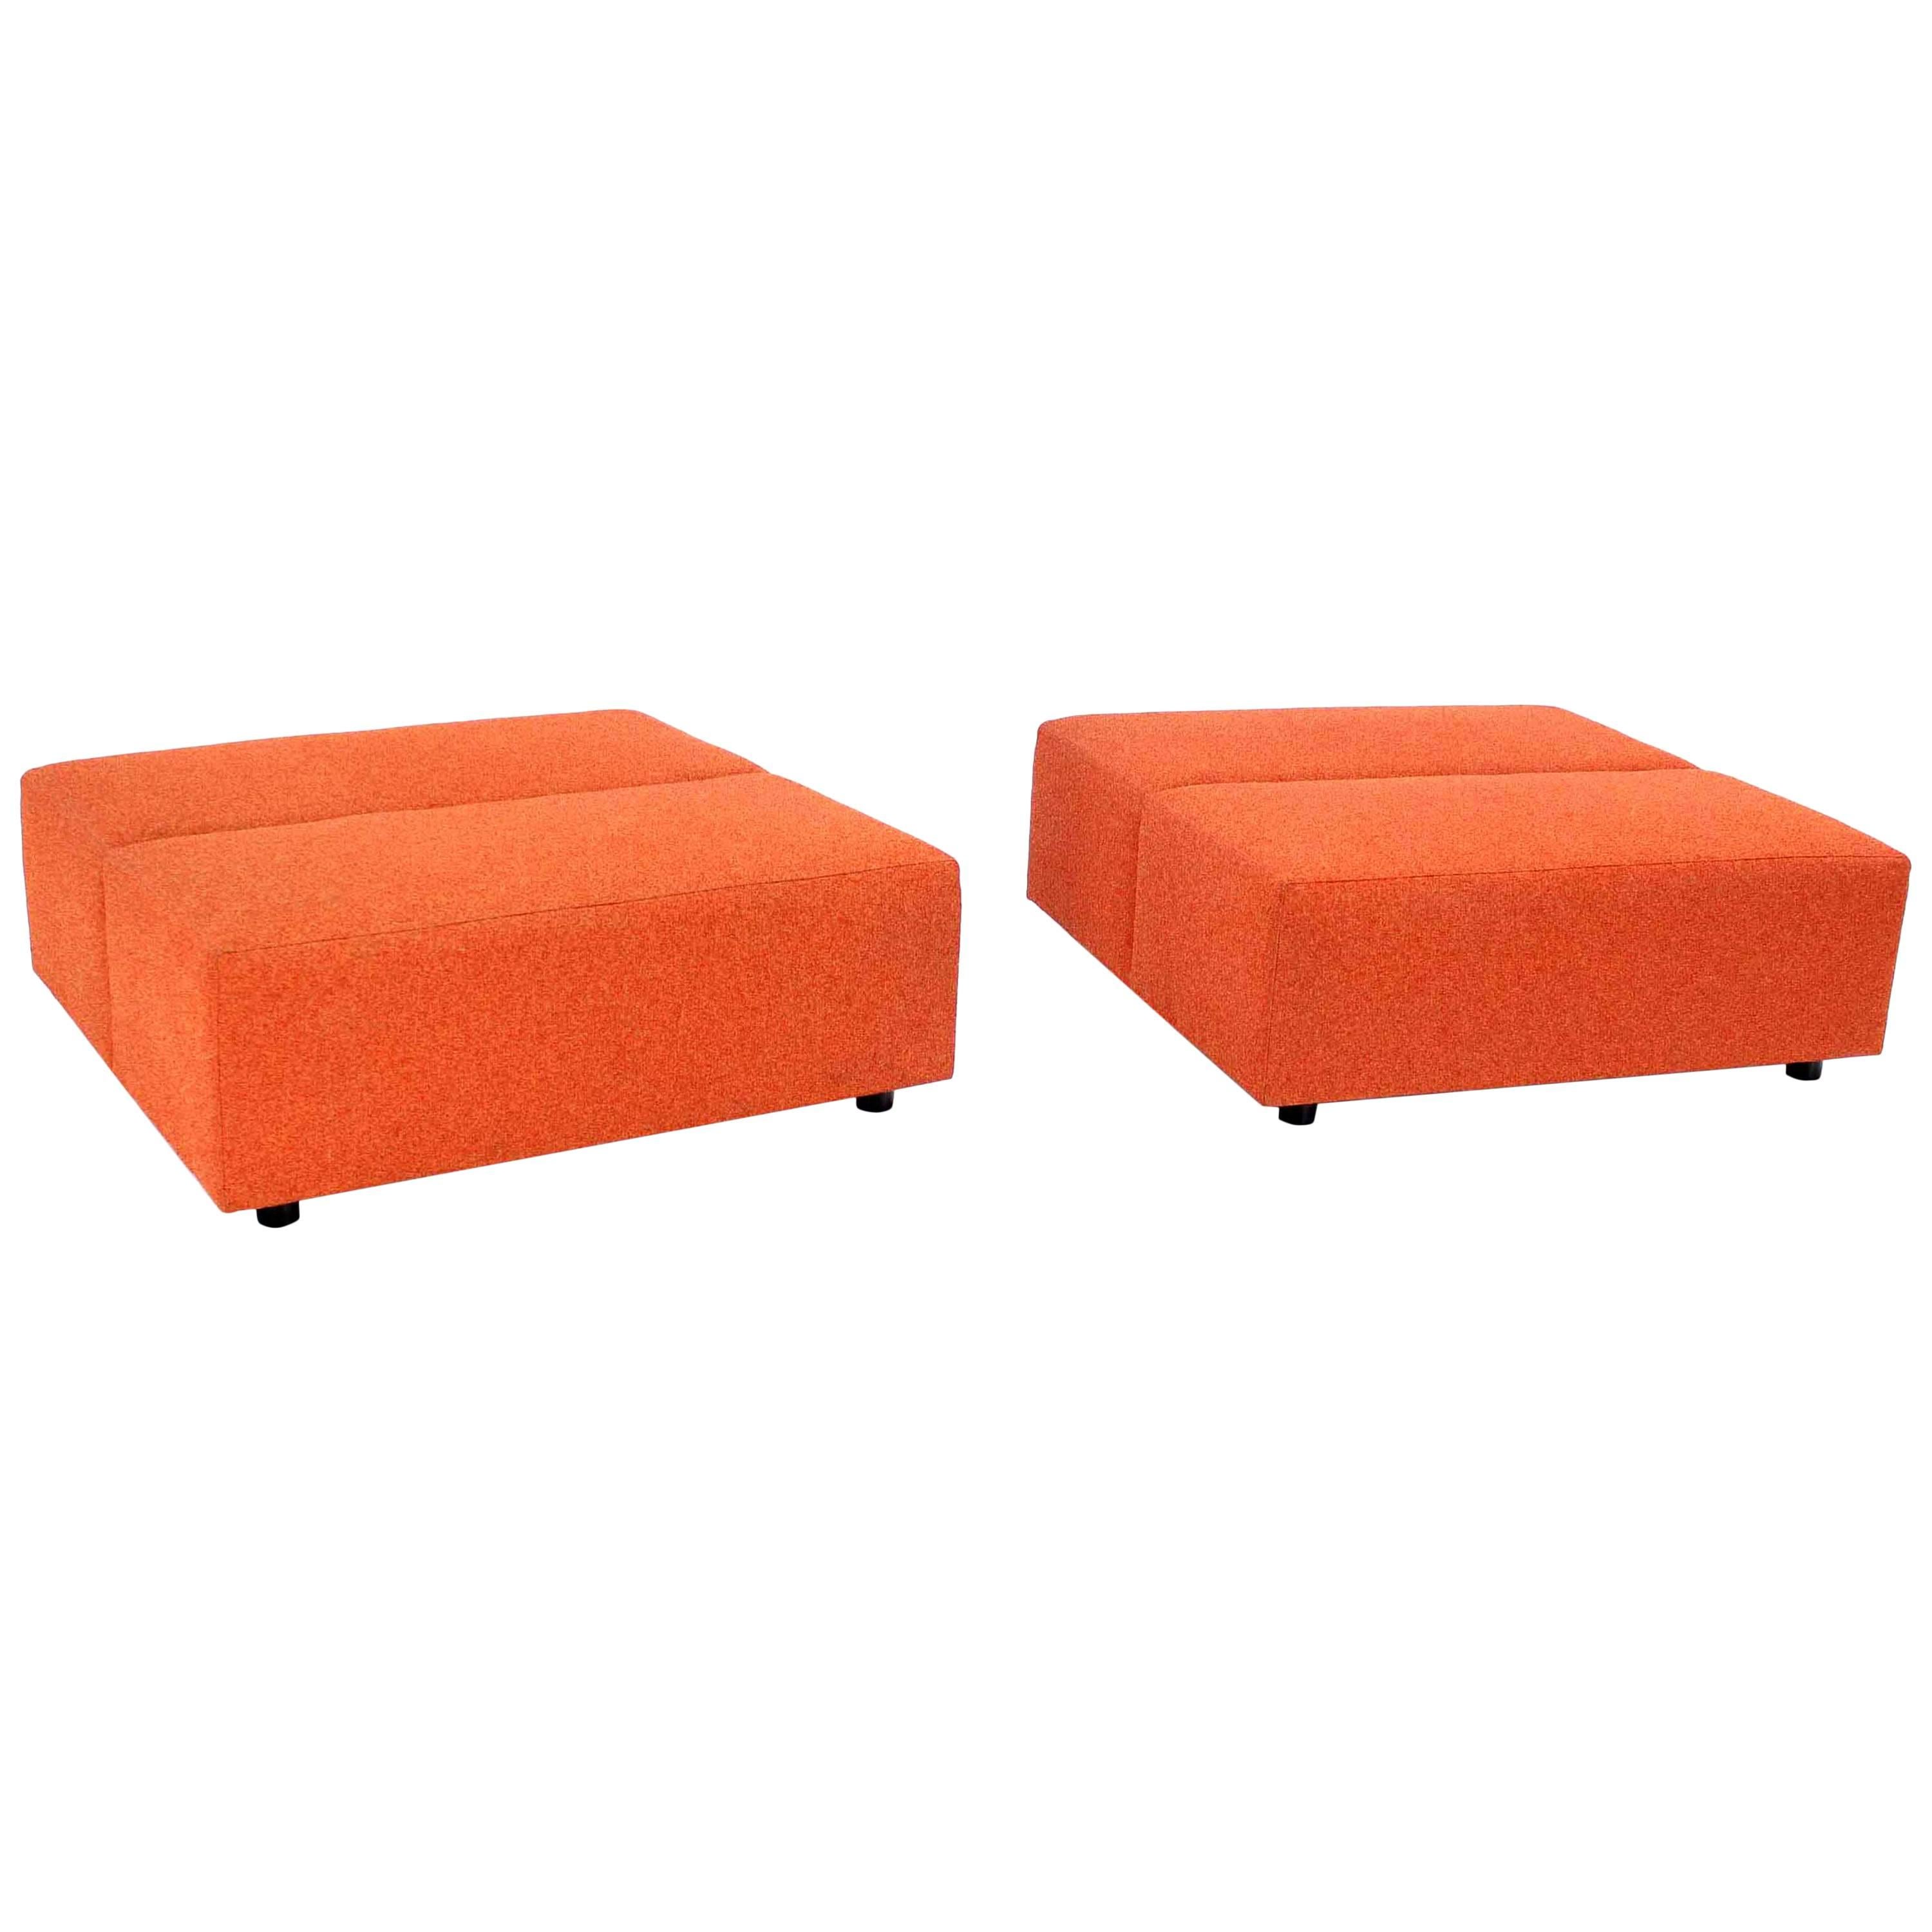 Pair of Large Oversize 4x4 Orange Upholstery Square Benches by Steelcase Sofa For Sale